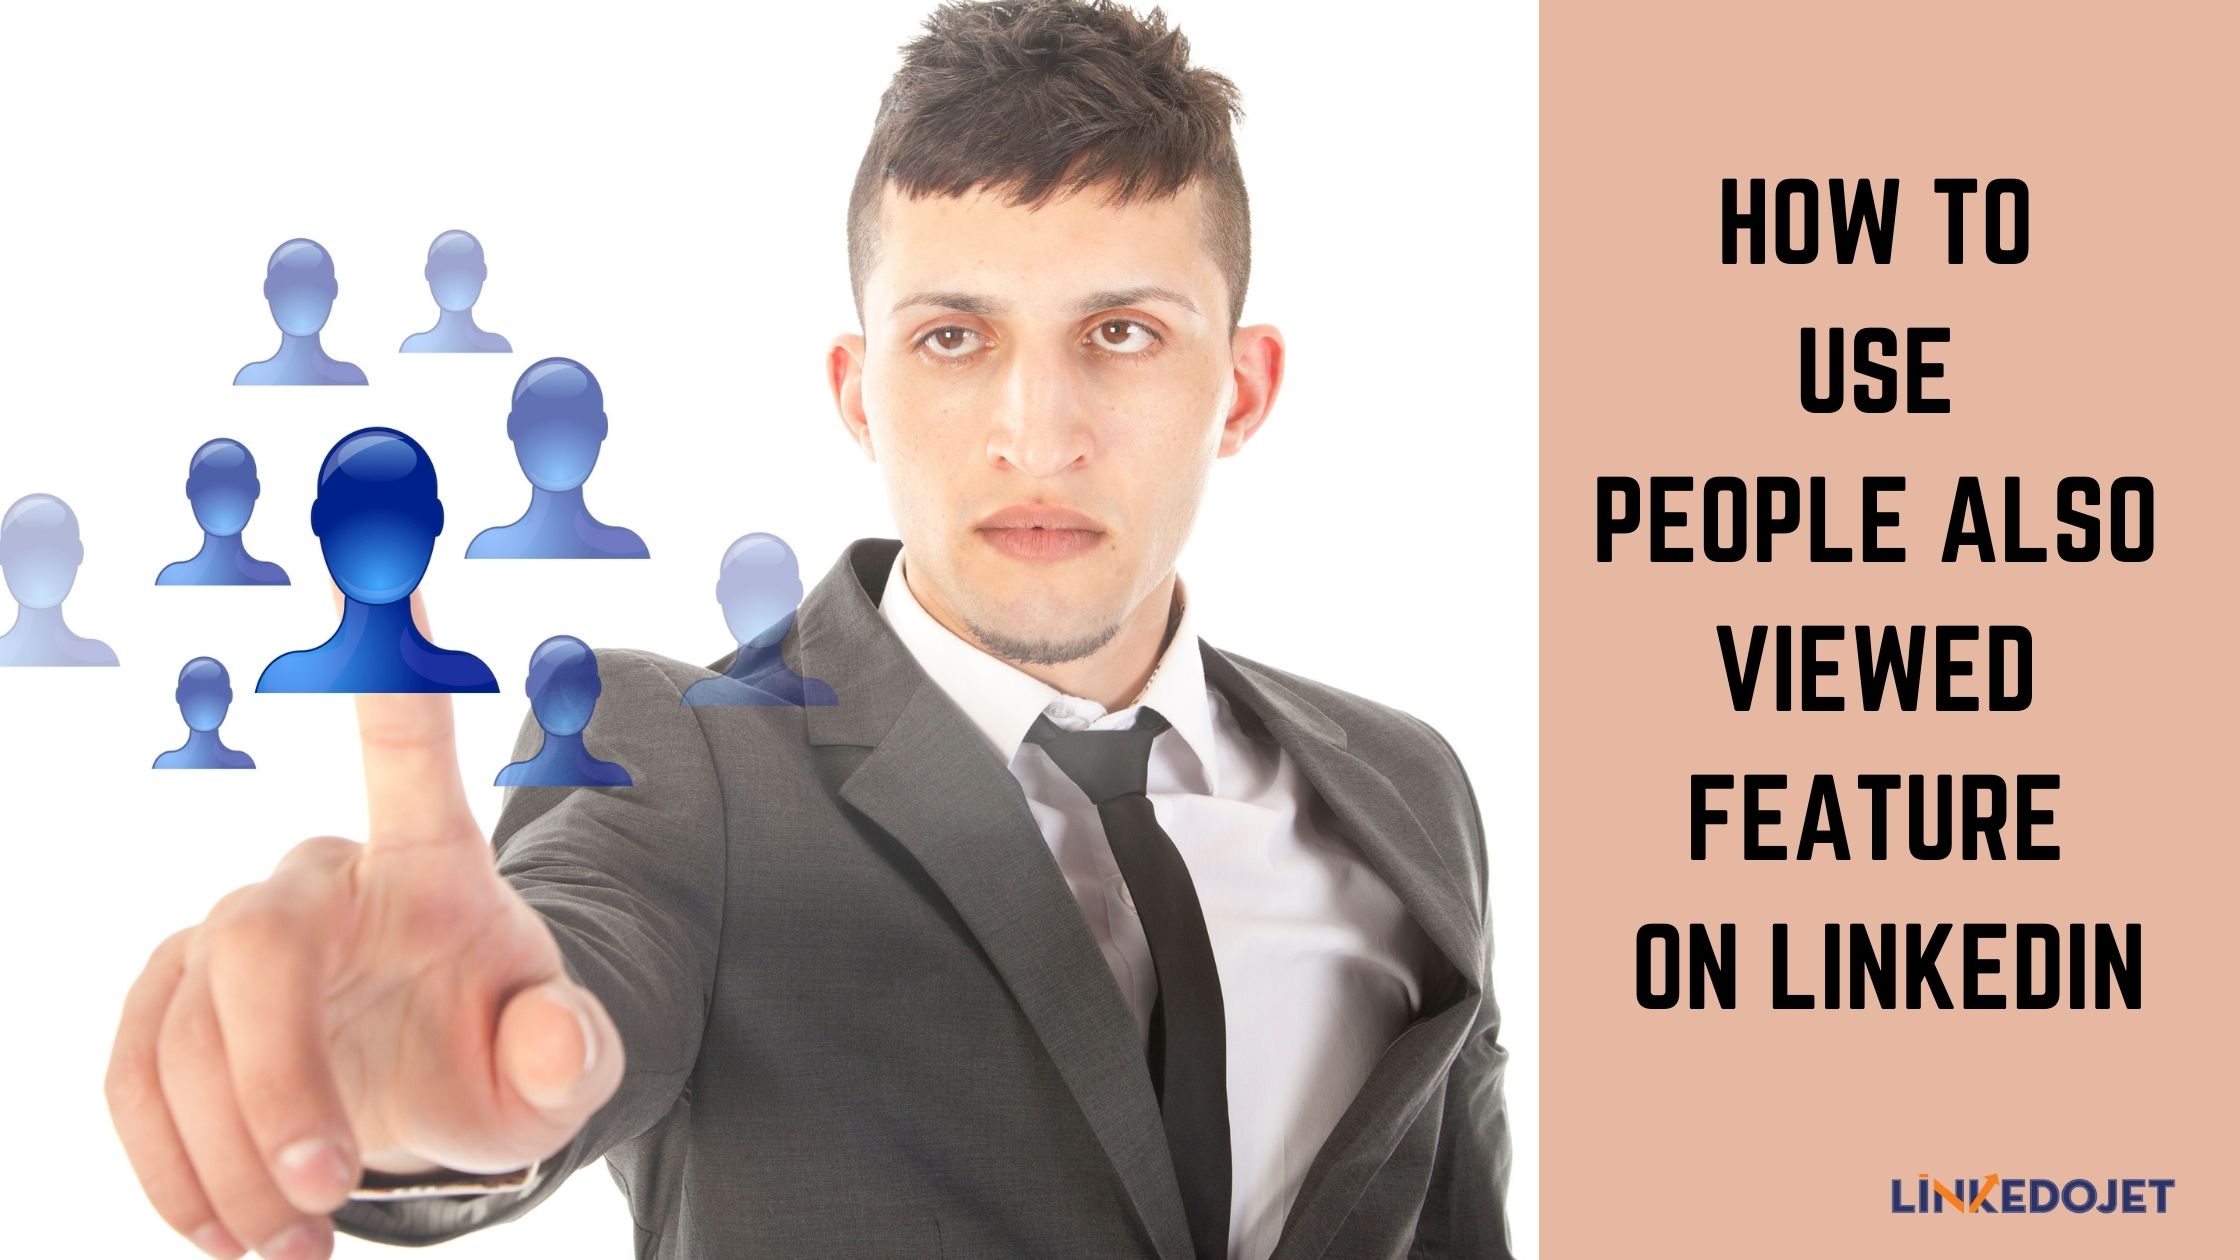 How to Make the Most of “People also viewed” LinkedIn Feature for Lead Generation?